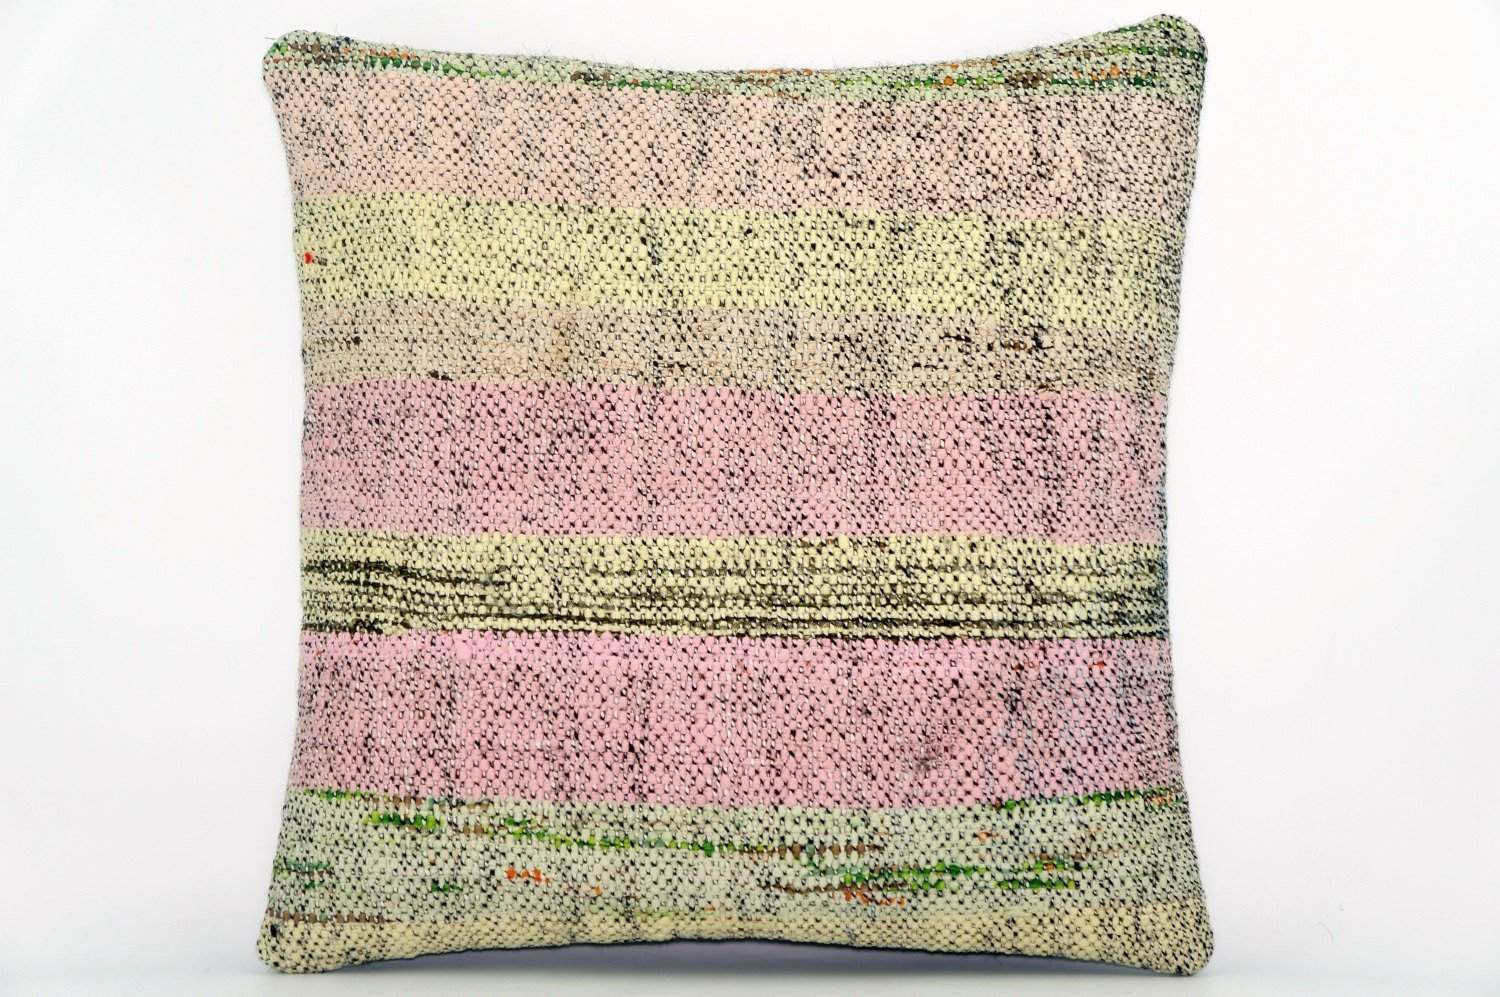 https://www.kilimpillowstore.com/cdn/shop/products/clearance-handwoven-hemp-pillow-green-pink-yellow-decorative-kilim-pillow-cover-1572_a-etsykilimpillows_2000x.jpeg?v=1601897321